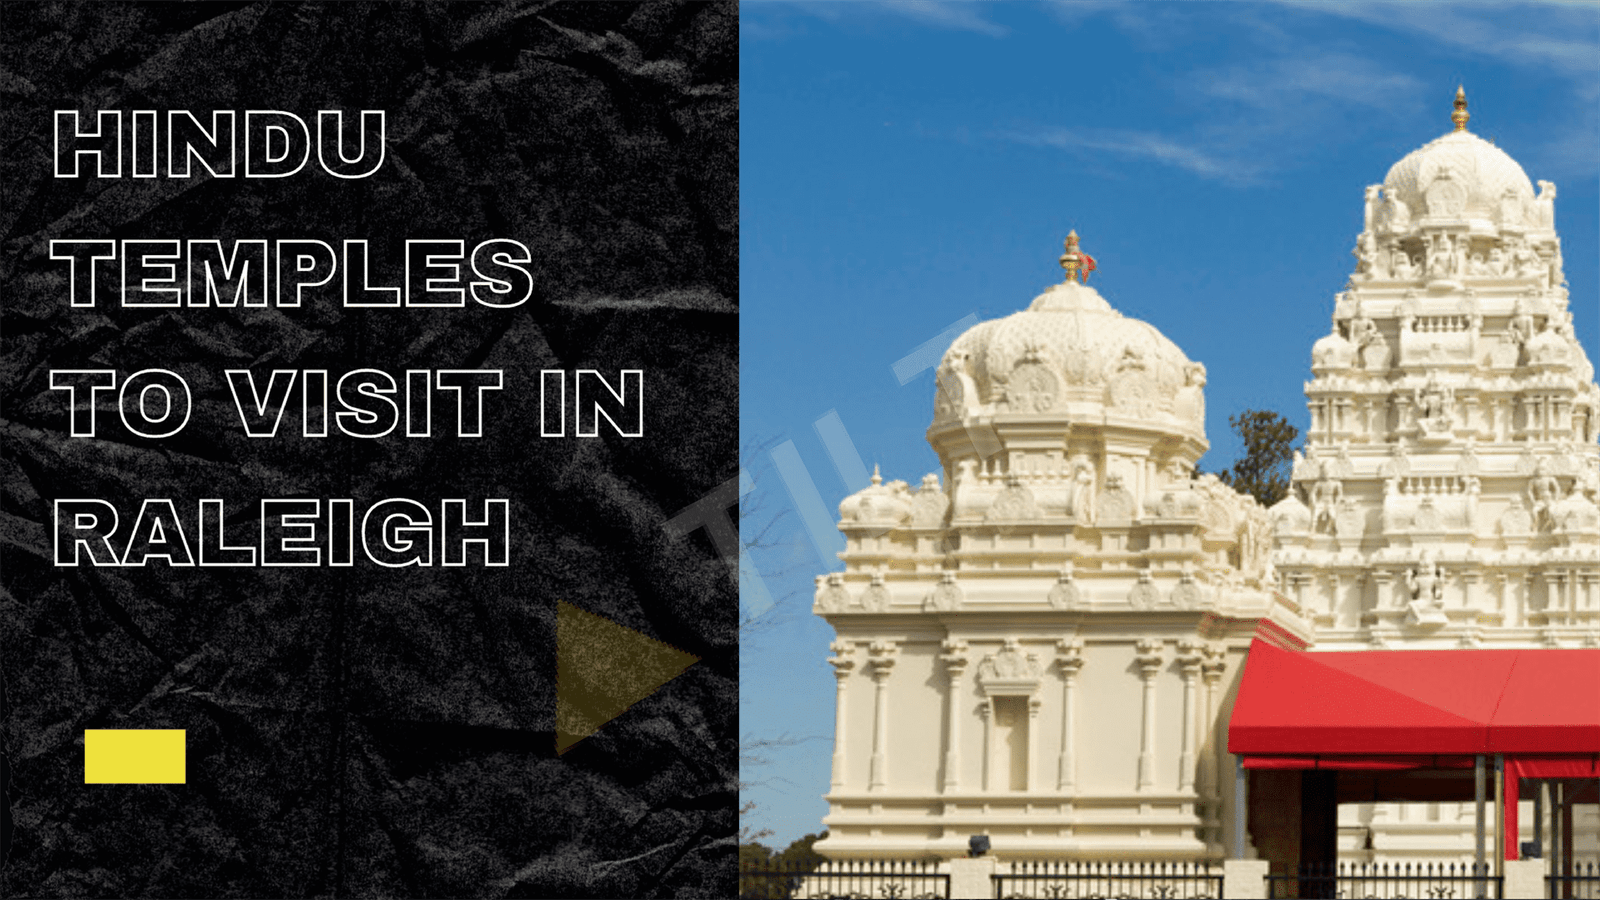 hindu temples to visit in raleigh - traingle tilt